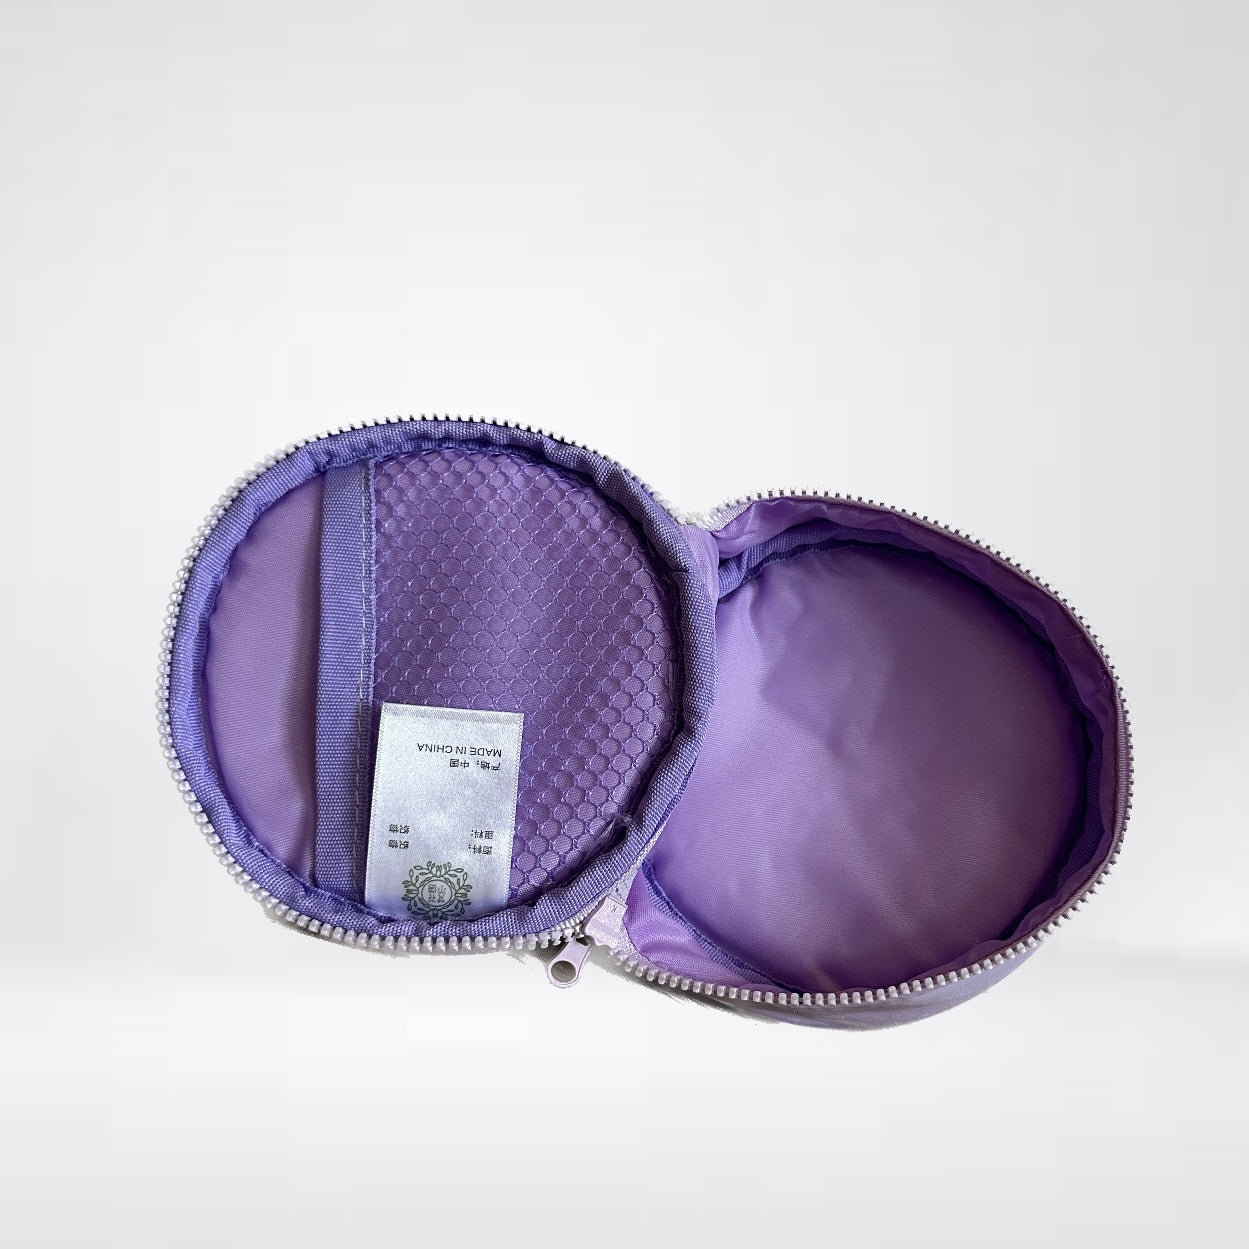 Bag "Cases" in lilac with smiley embroidery for cables